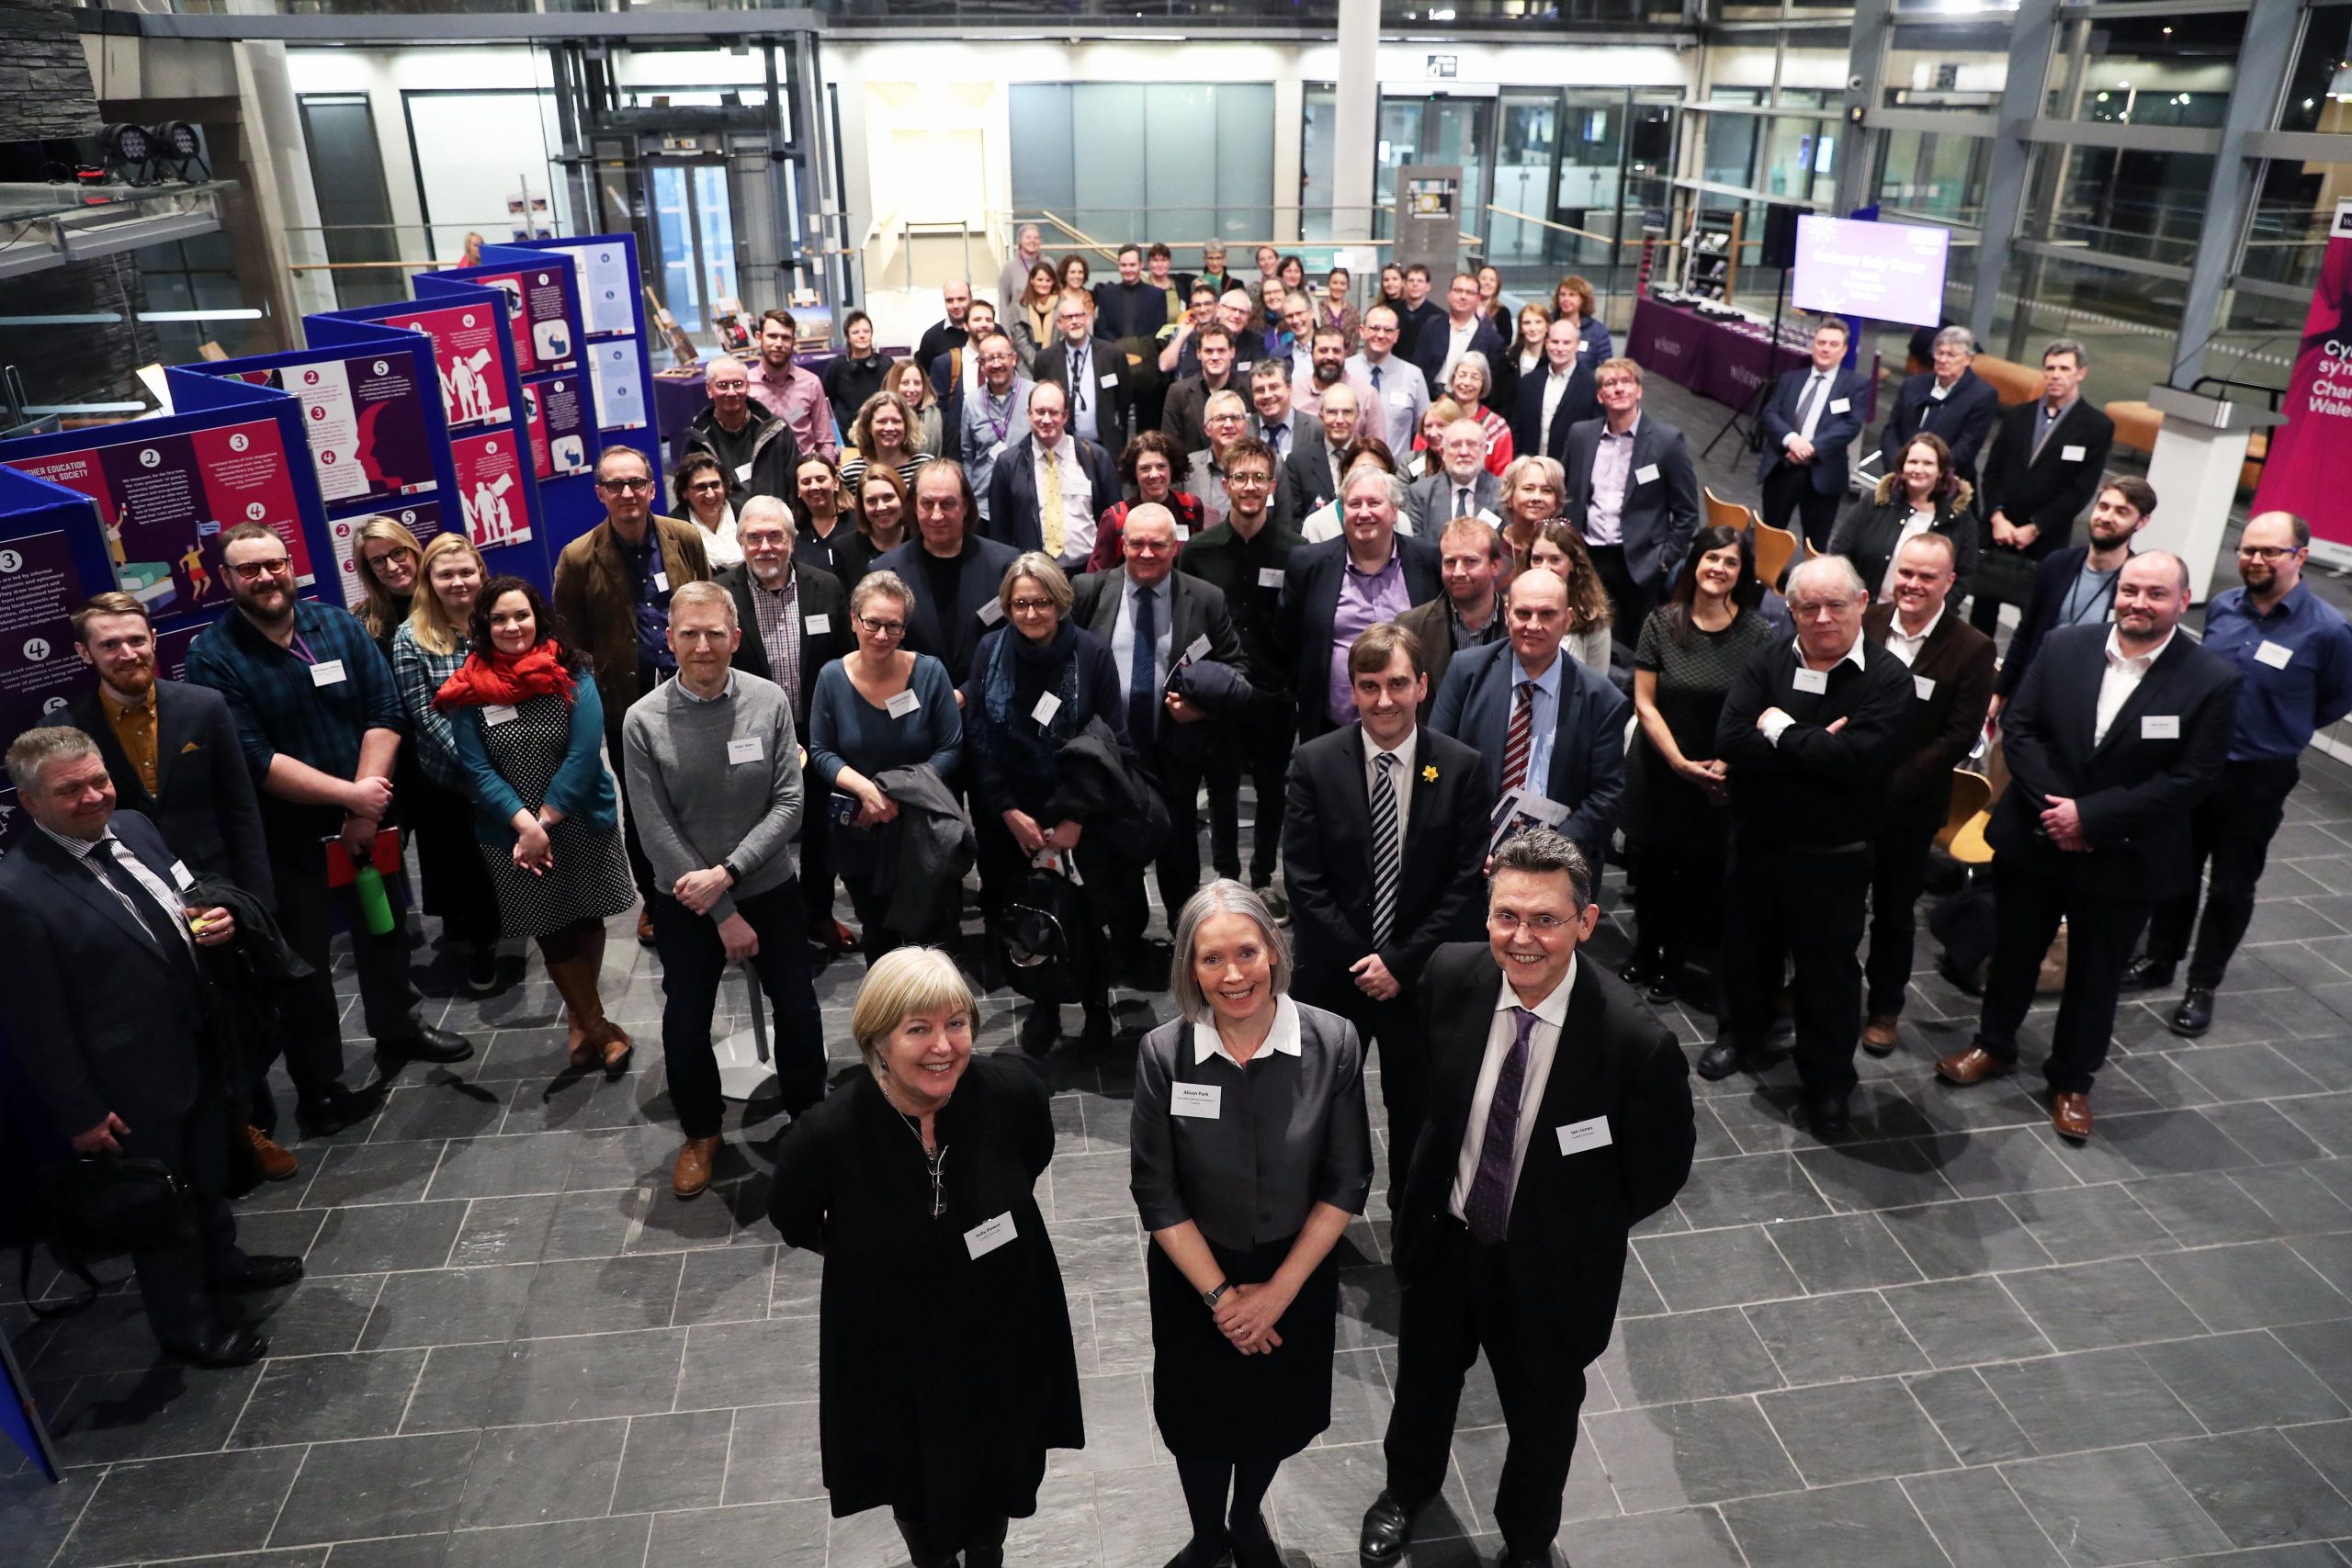 Celebrating Civil Society Research event - group shot of all attendees at the Senedd